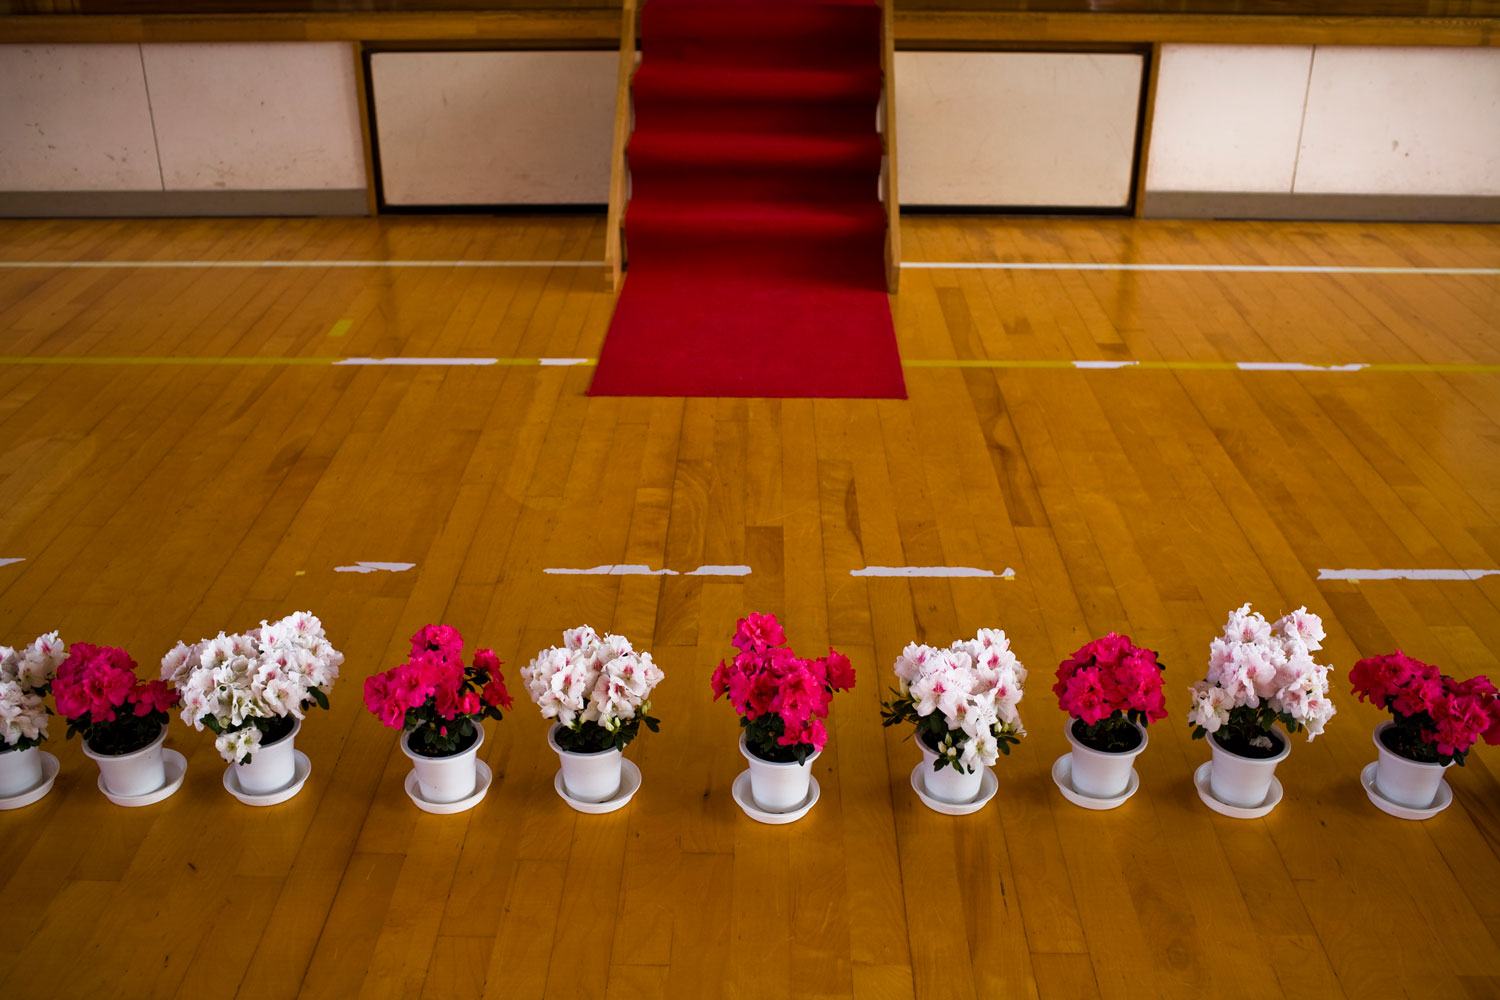 Normal life resumes as residents in Misawa held a graduation ceremony at a local school, March 19, 2011.